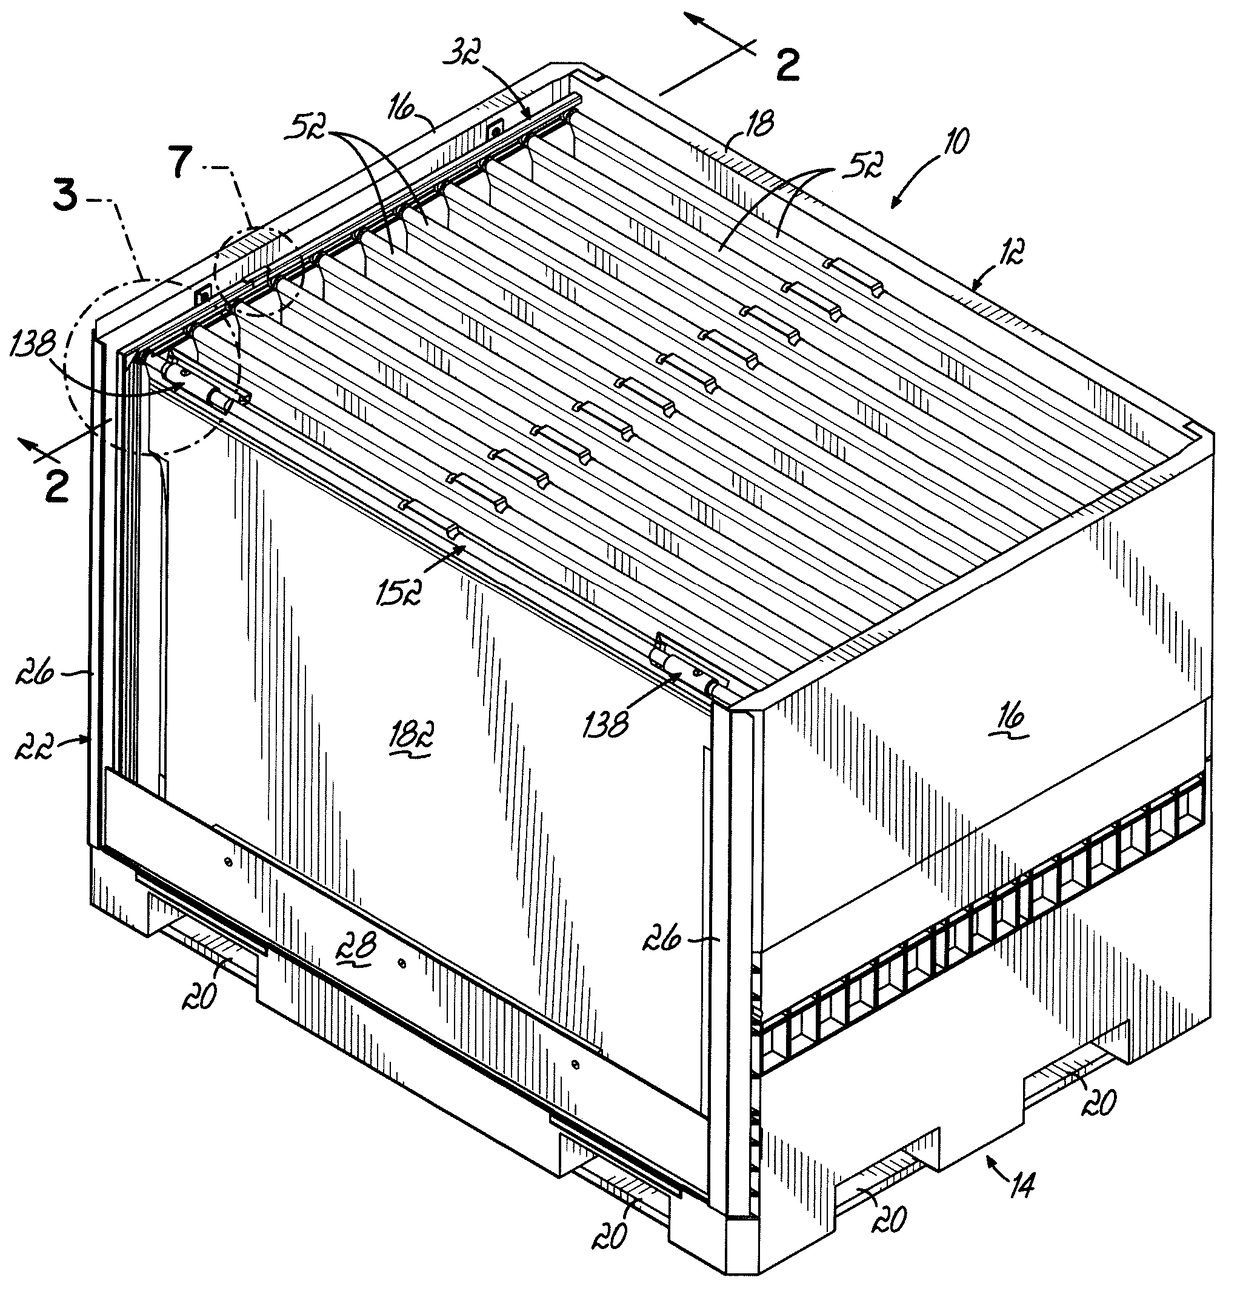 Container Having At Least One Lockable Crossbar Assembly Movable Along Tracks